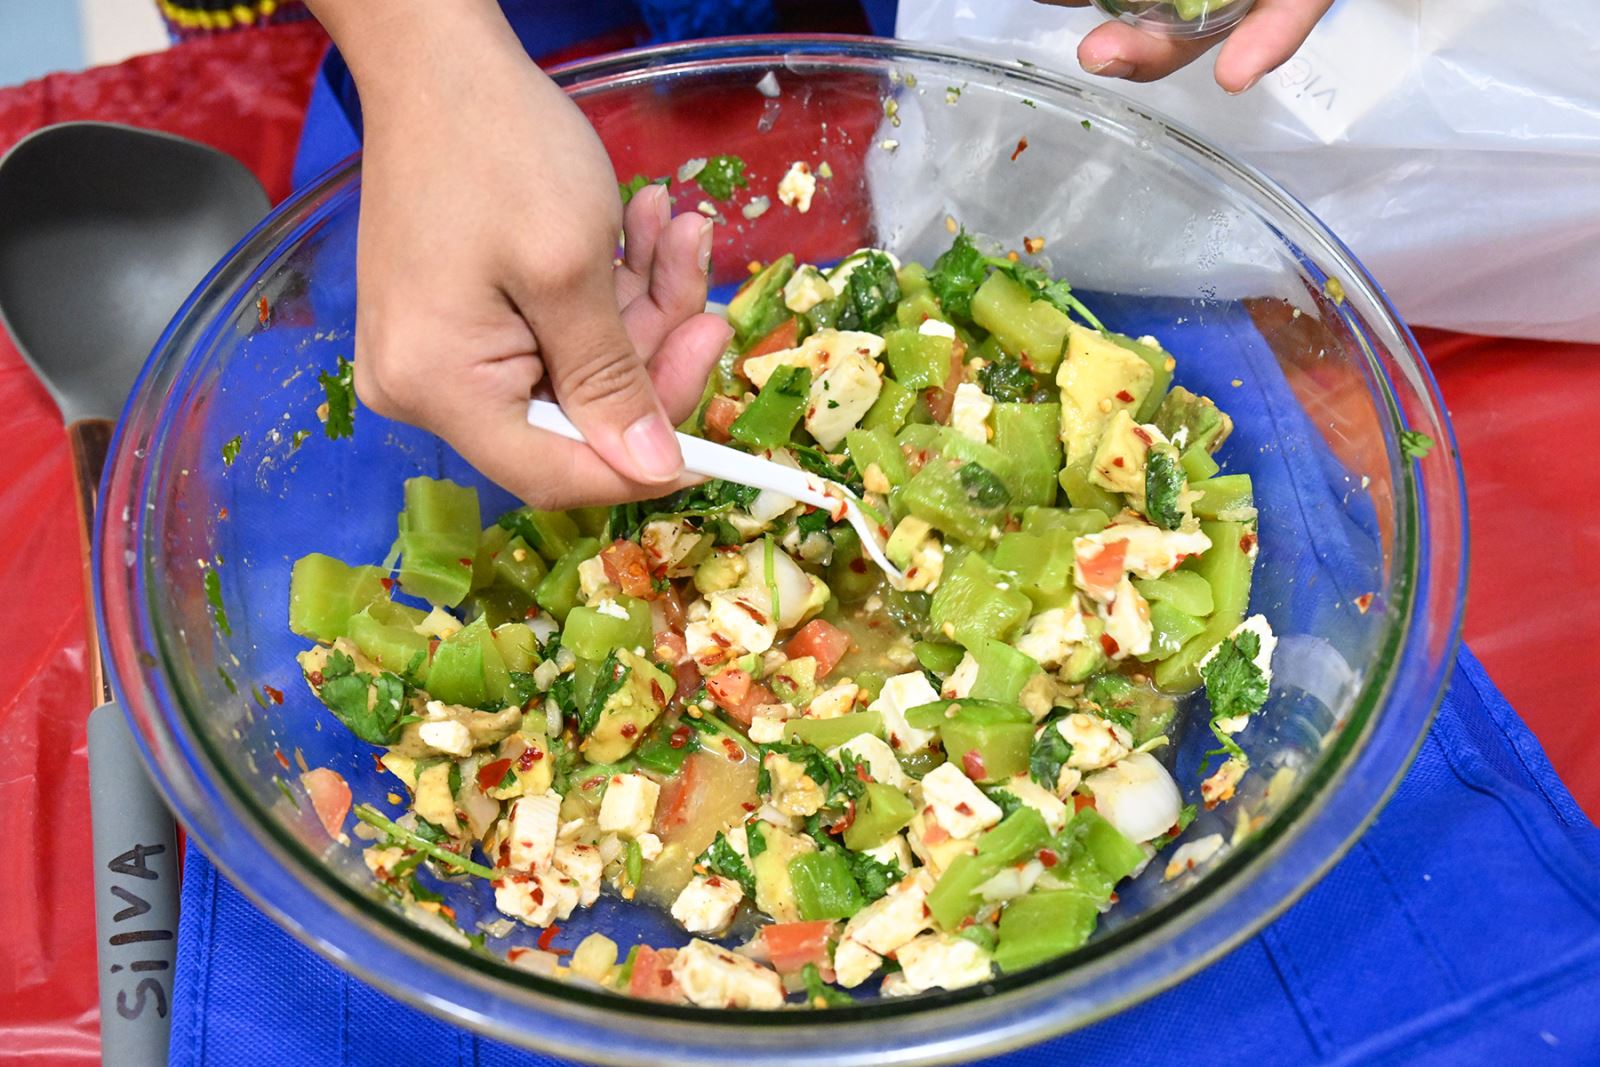 Students prepared a variety of traditional foods, such as this fresh salsa.